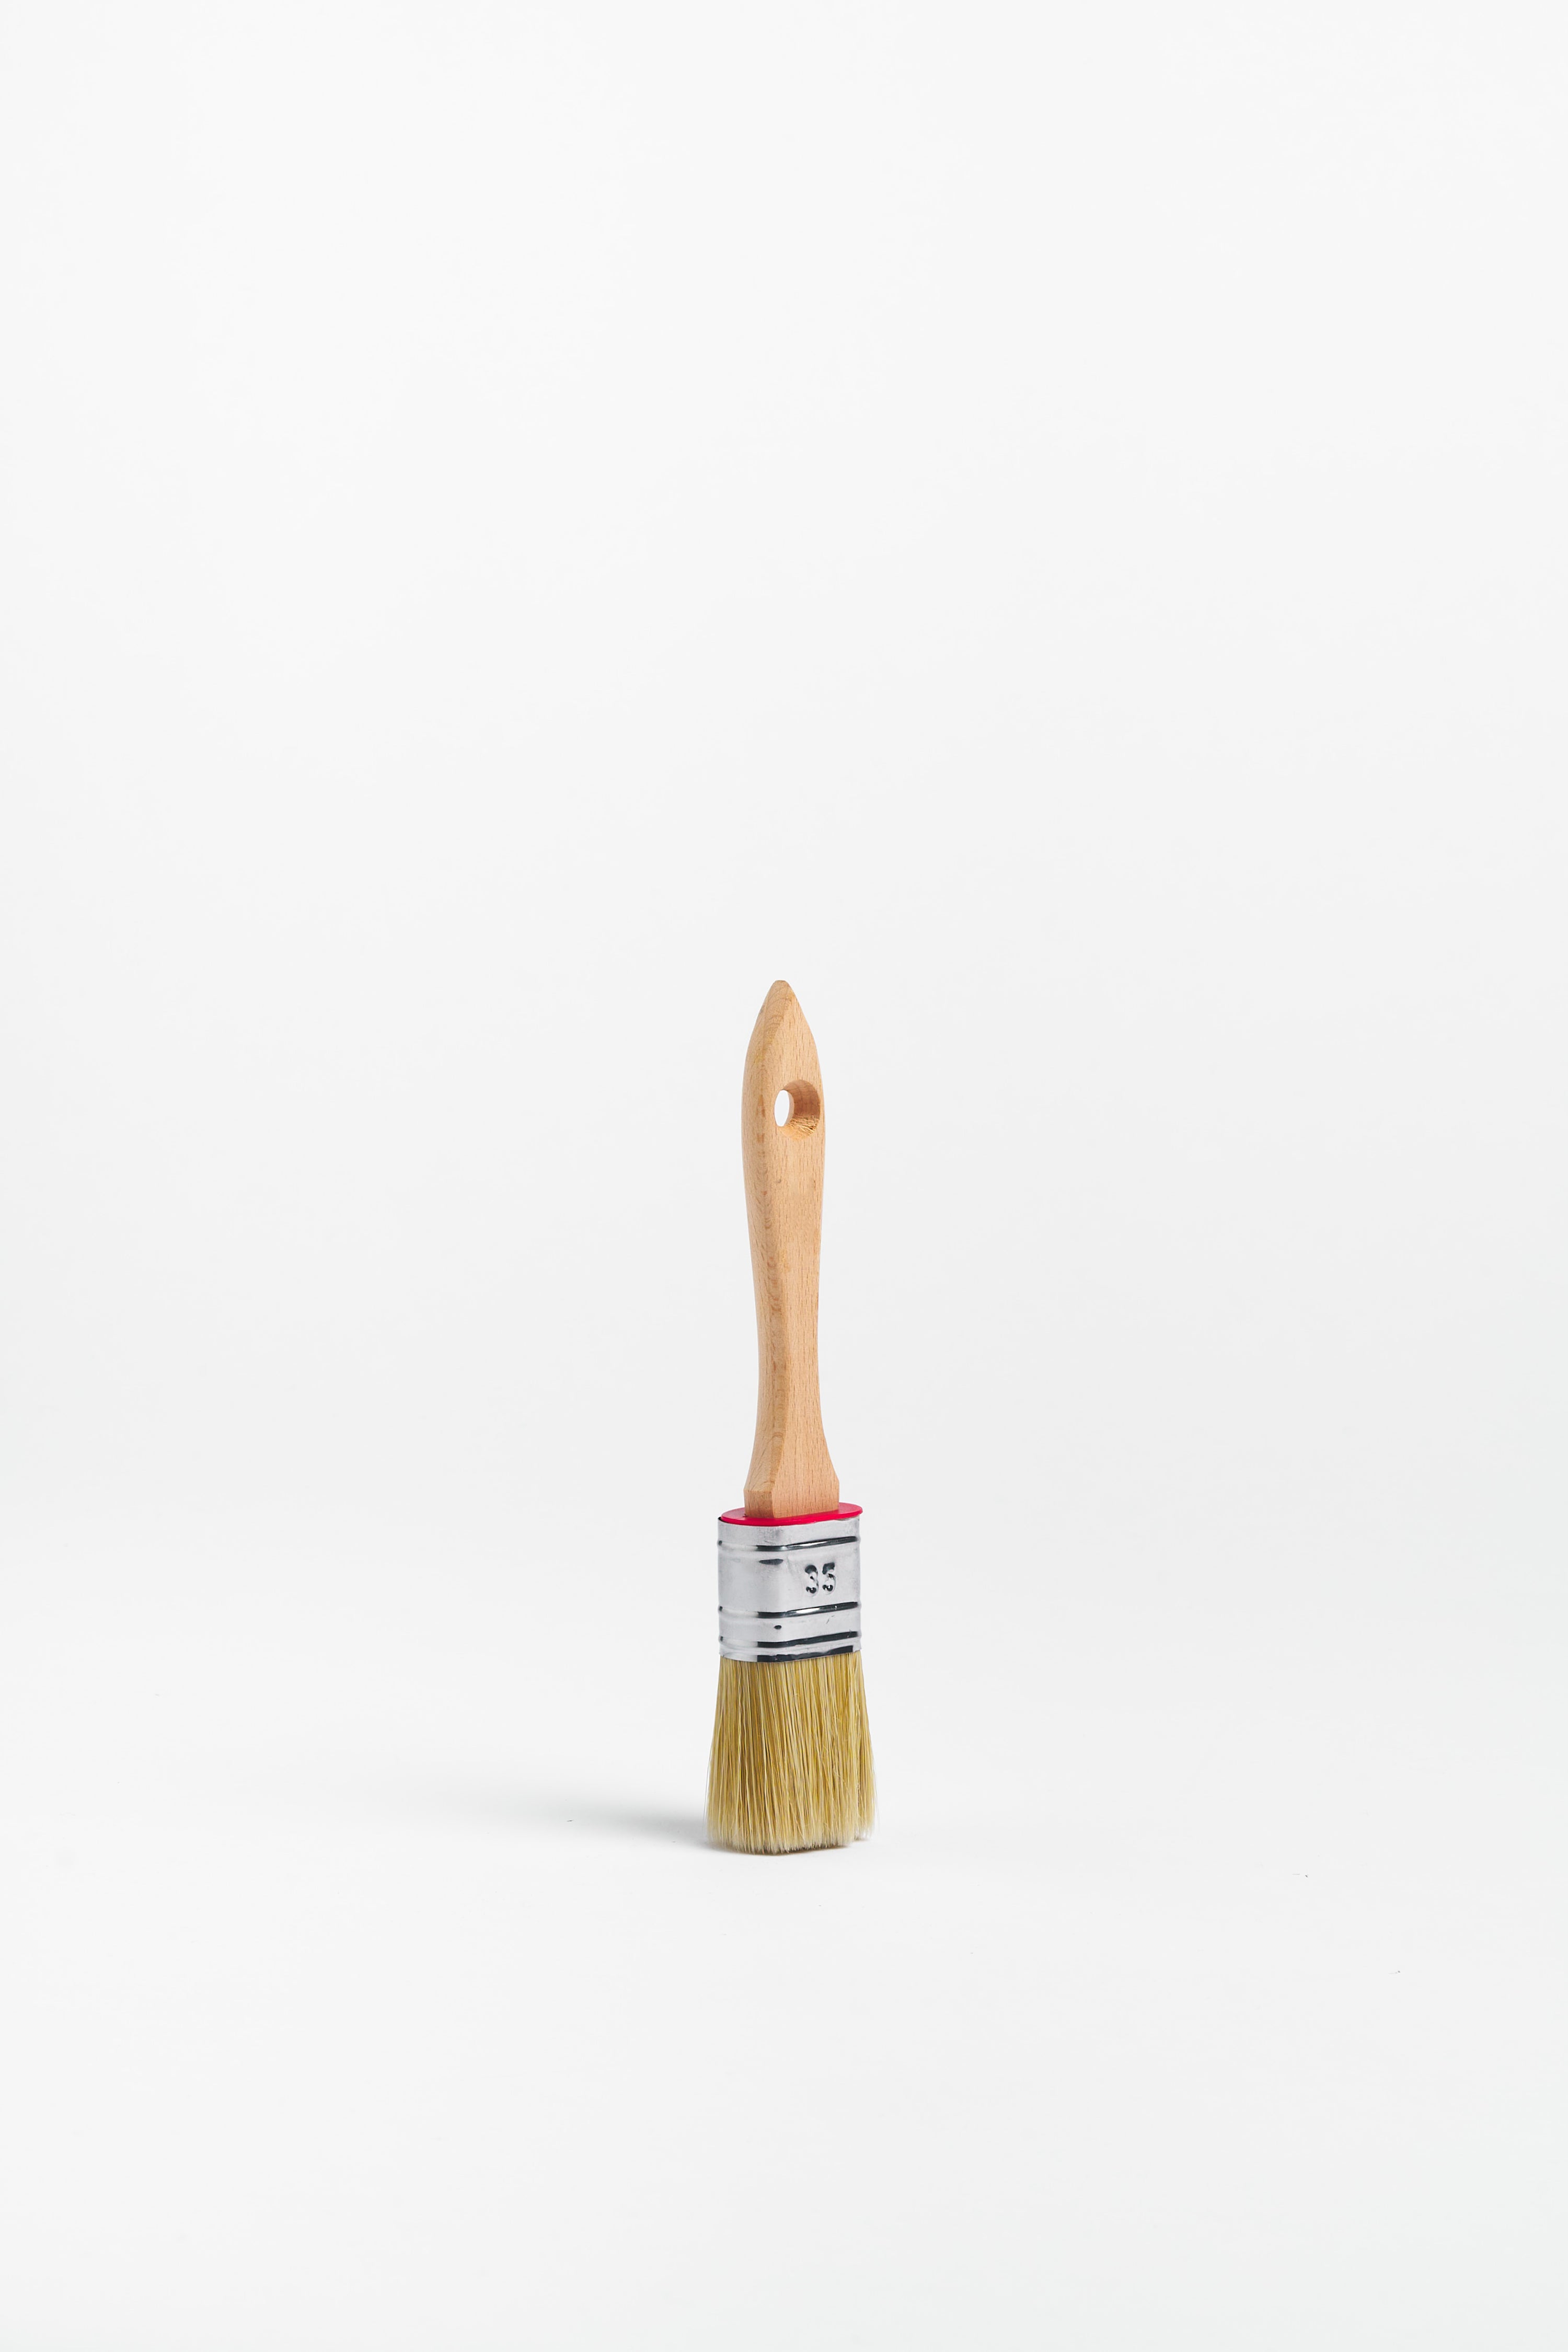 Paint Brush for Cutting In — Trade grade paint tools by Blēo